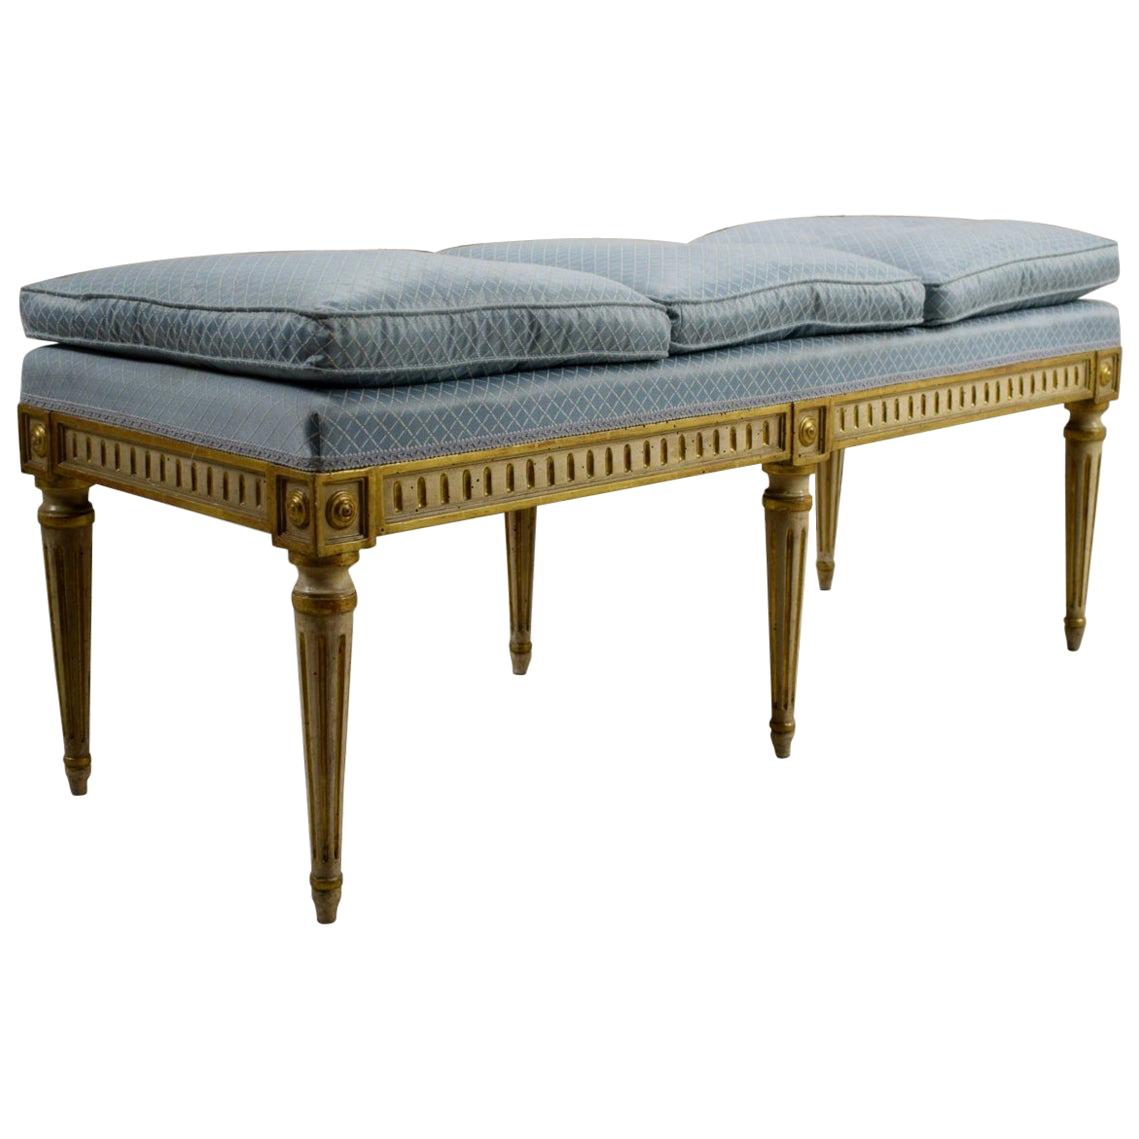 18th Century, Italian Neoclassical Lacquered and Giltwood Center Bench